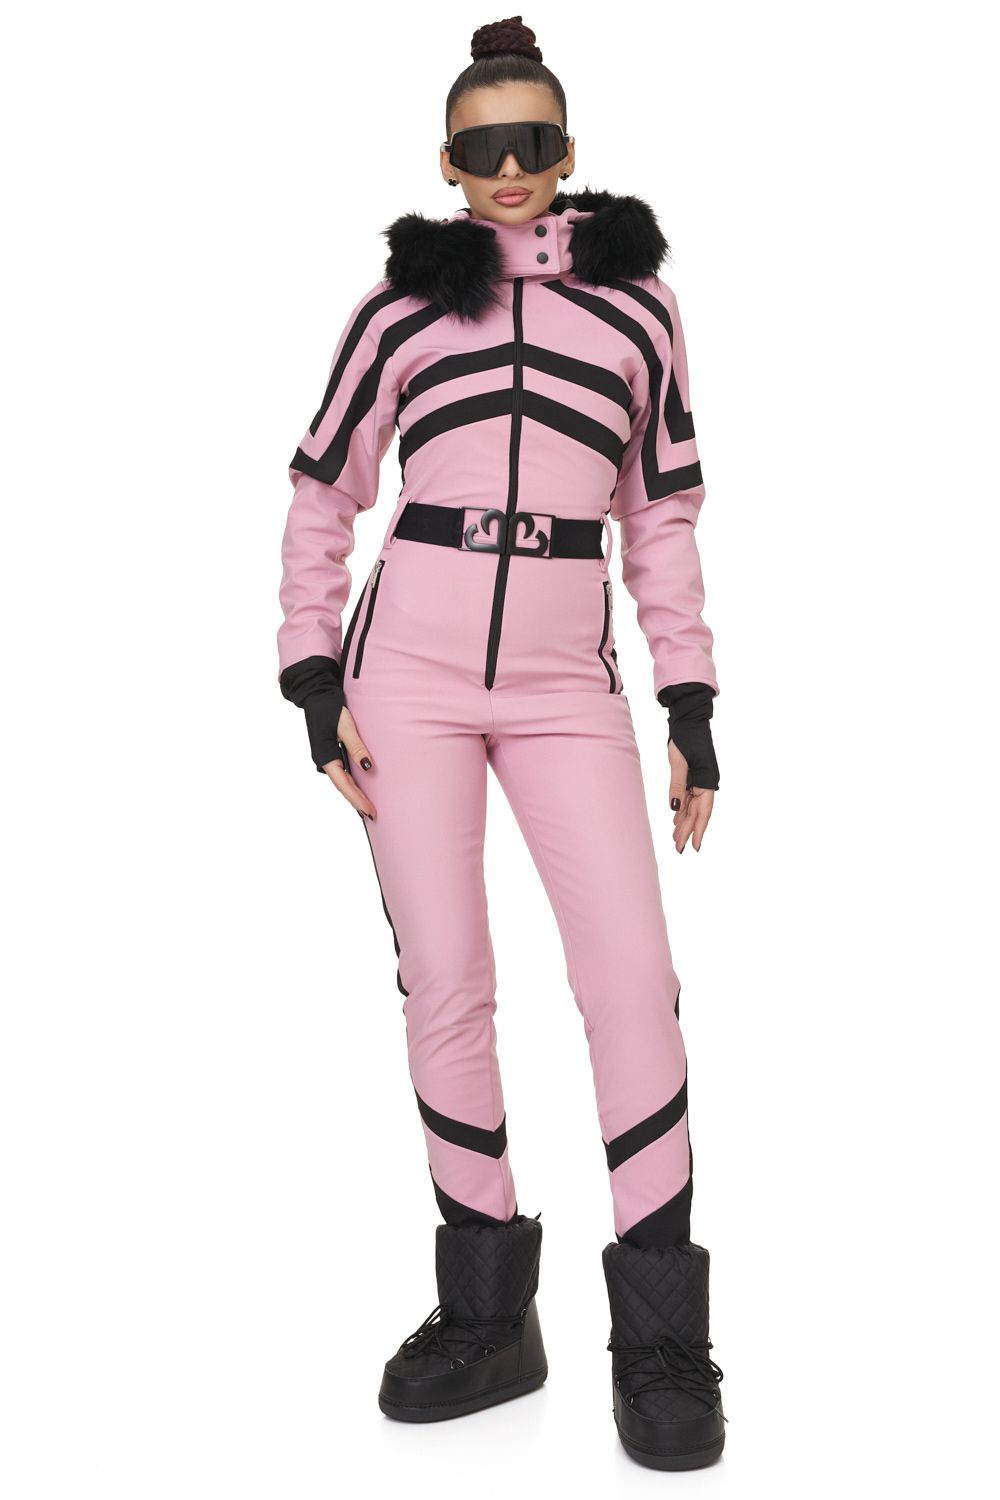 Meyba Bogas pink casual ski overalls